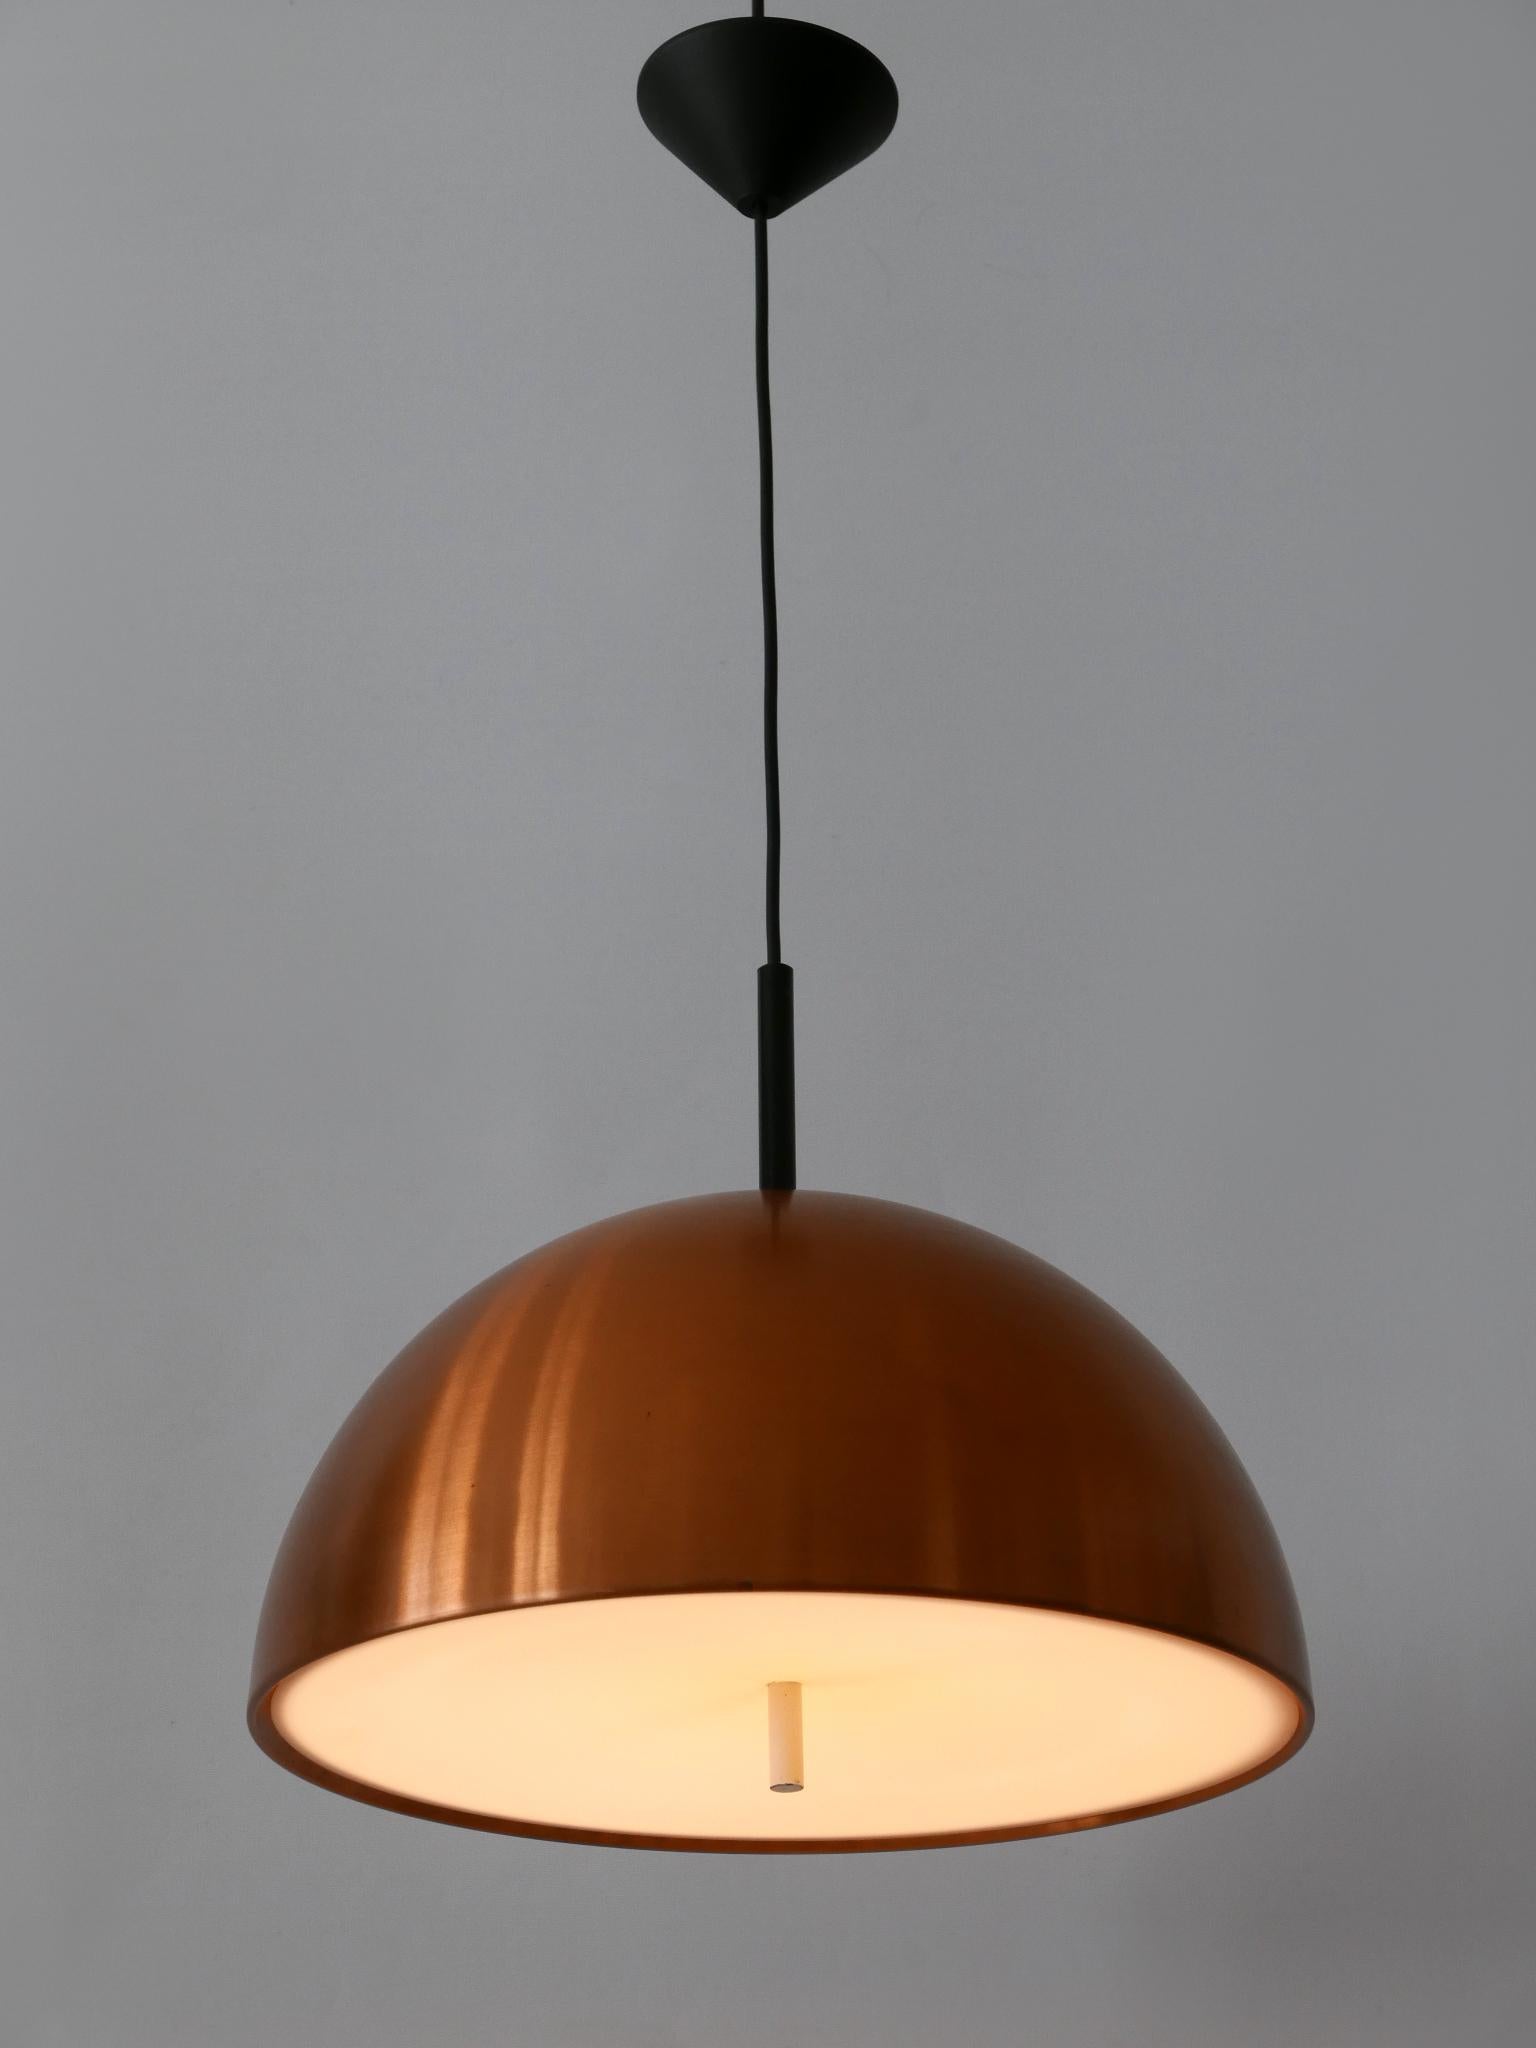 Mid-20th Century Elegant Mid-Century Modern Copper Pendant Lamp by Staff & Schwarz Germany 1960s For Sale